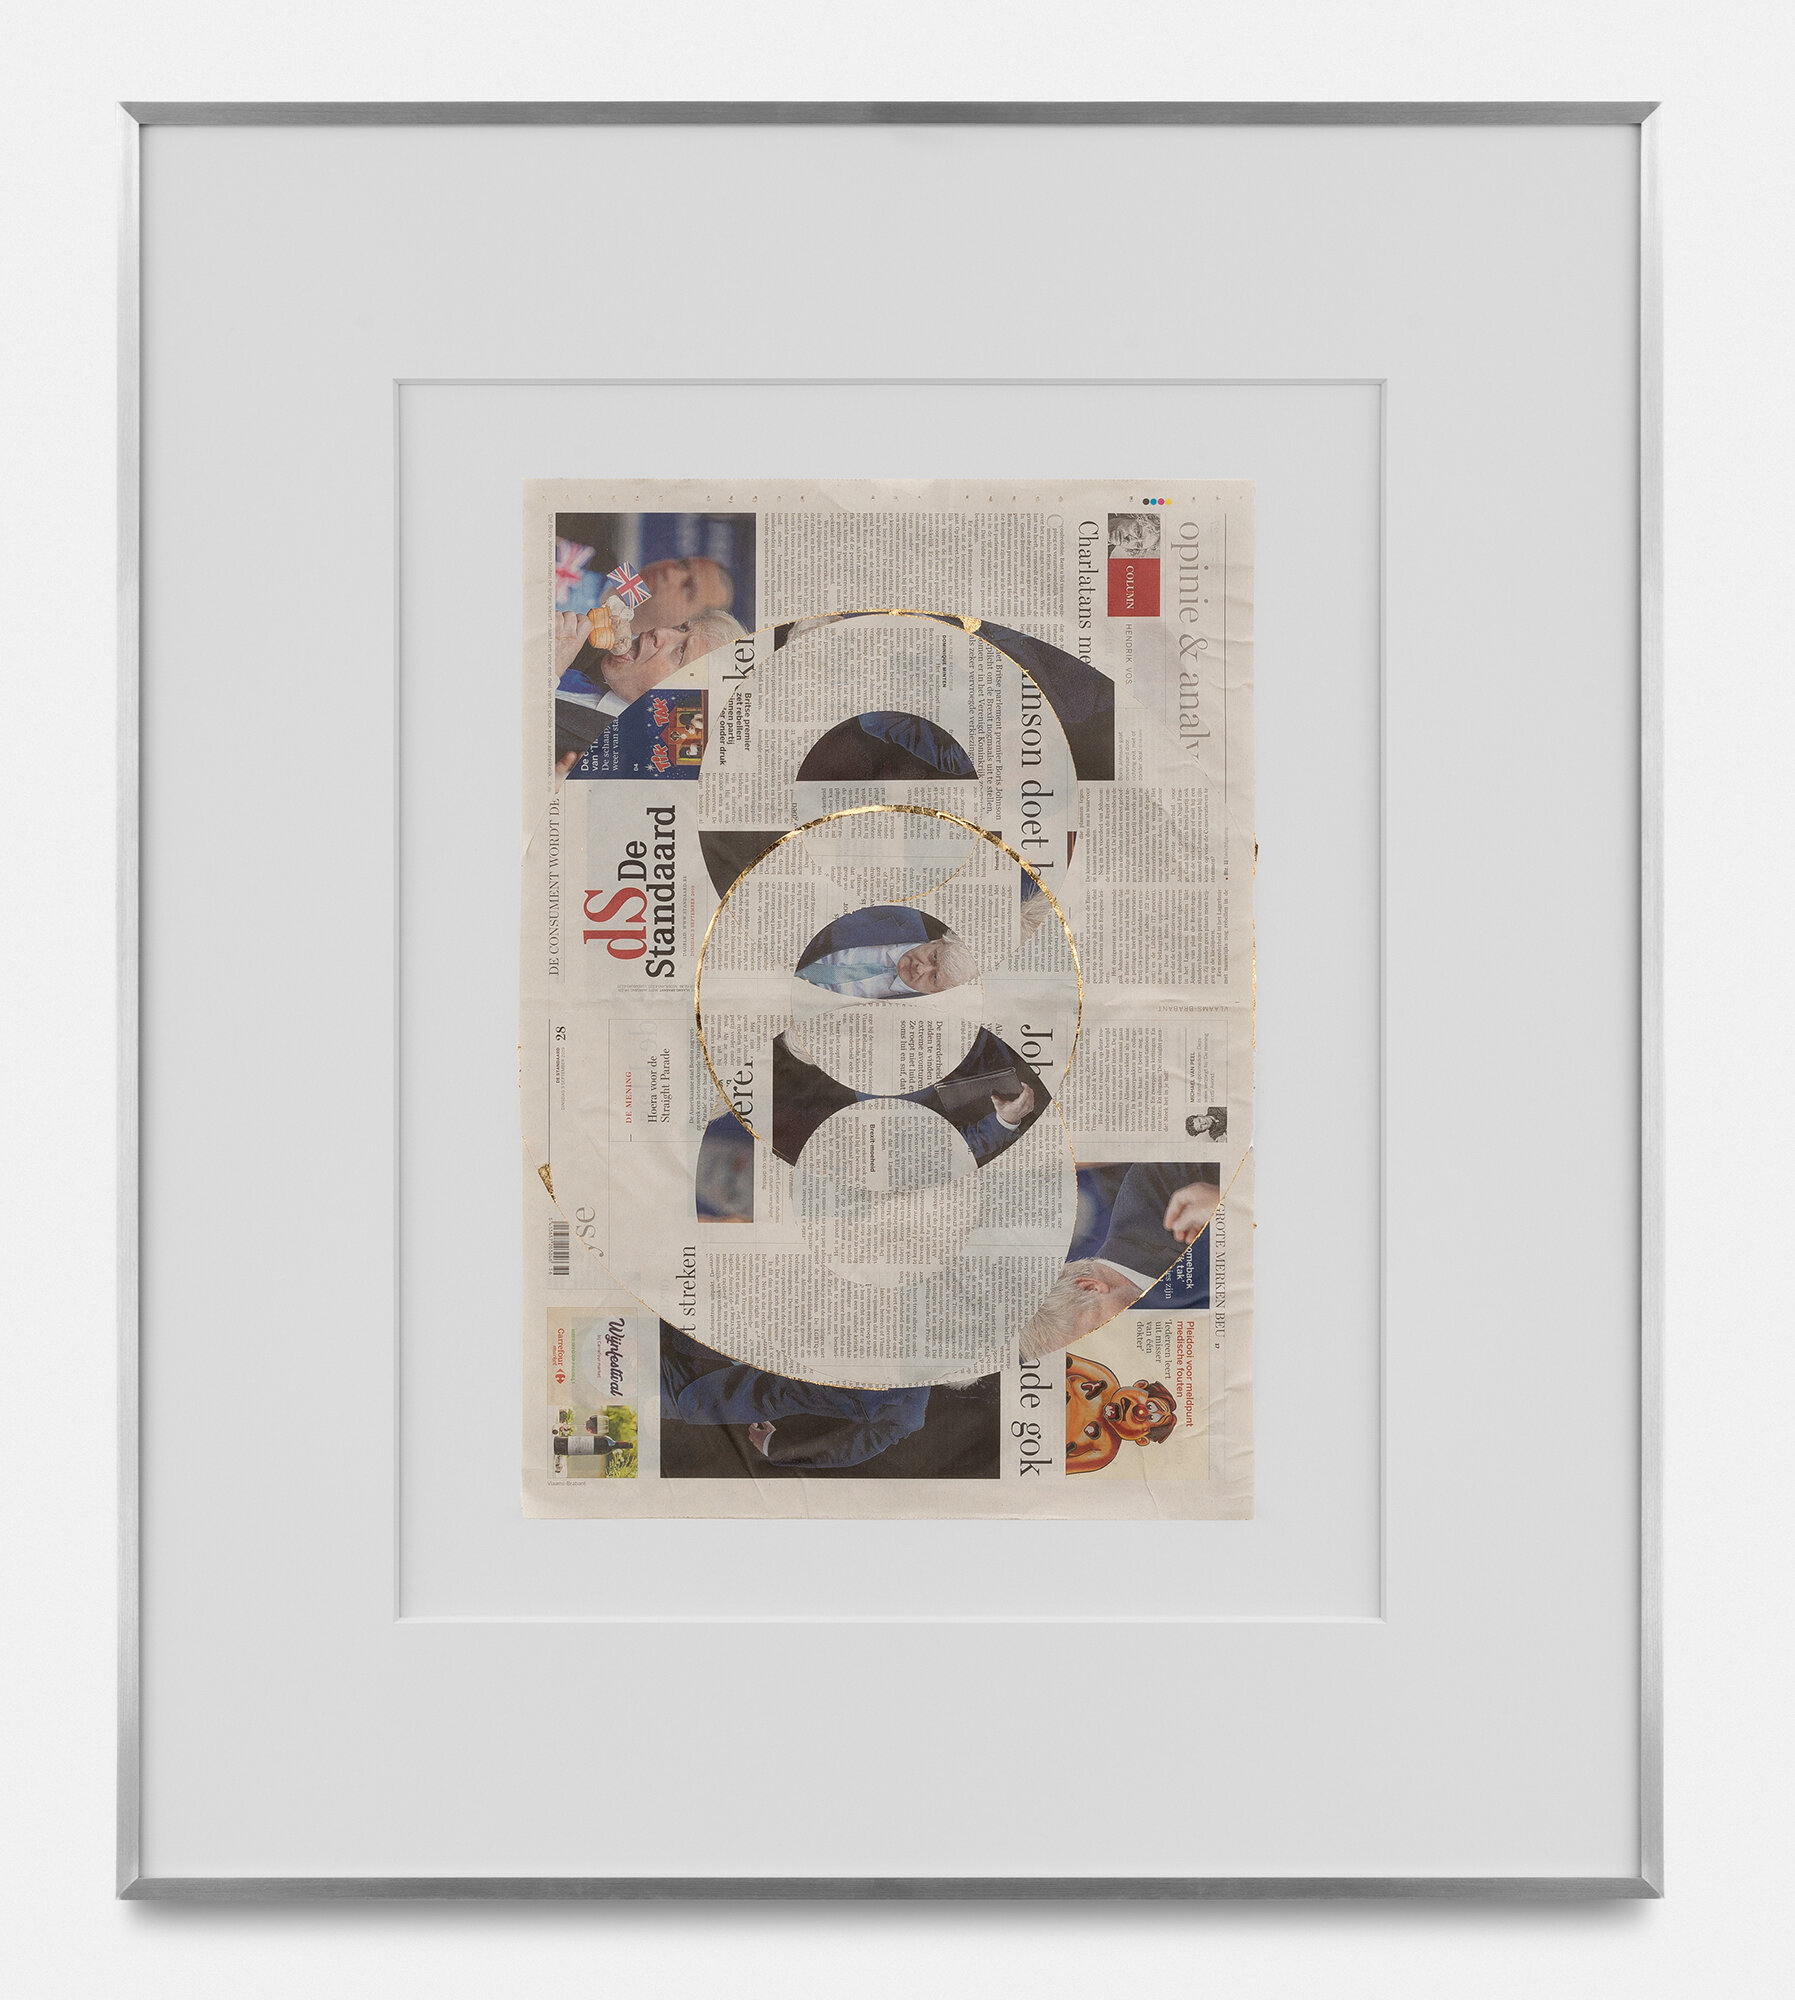   Blind Collage (Three 180° Rotations, de Standaard, Tuesday, September 3, 2019)    2019   Newspaper, tape, and 22 karat gold leaf  39 1/8 x 31 1/4 inches  Exhibition:  Three Pictures, 2019    